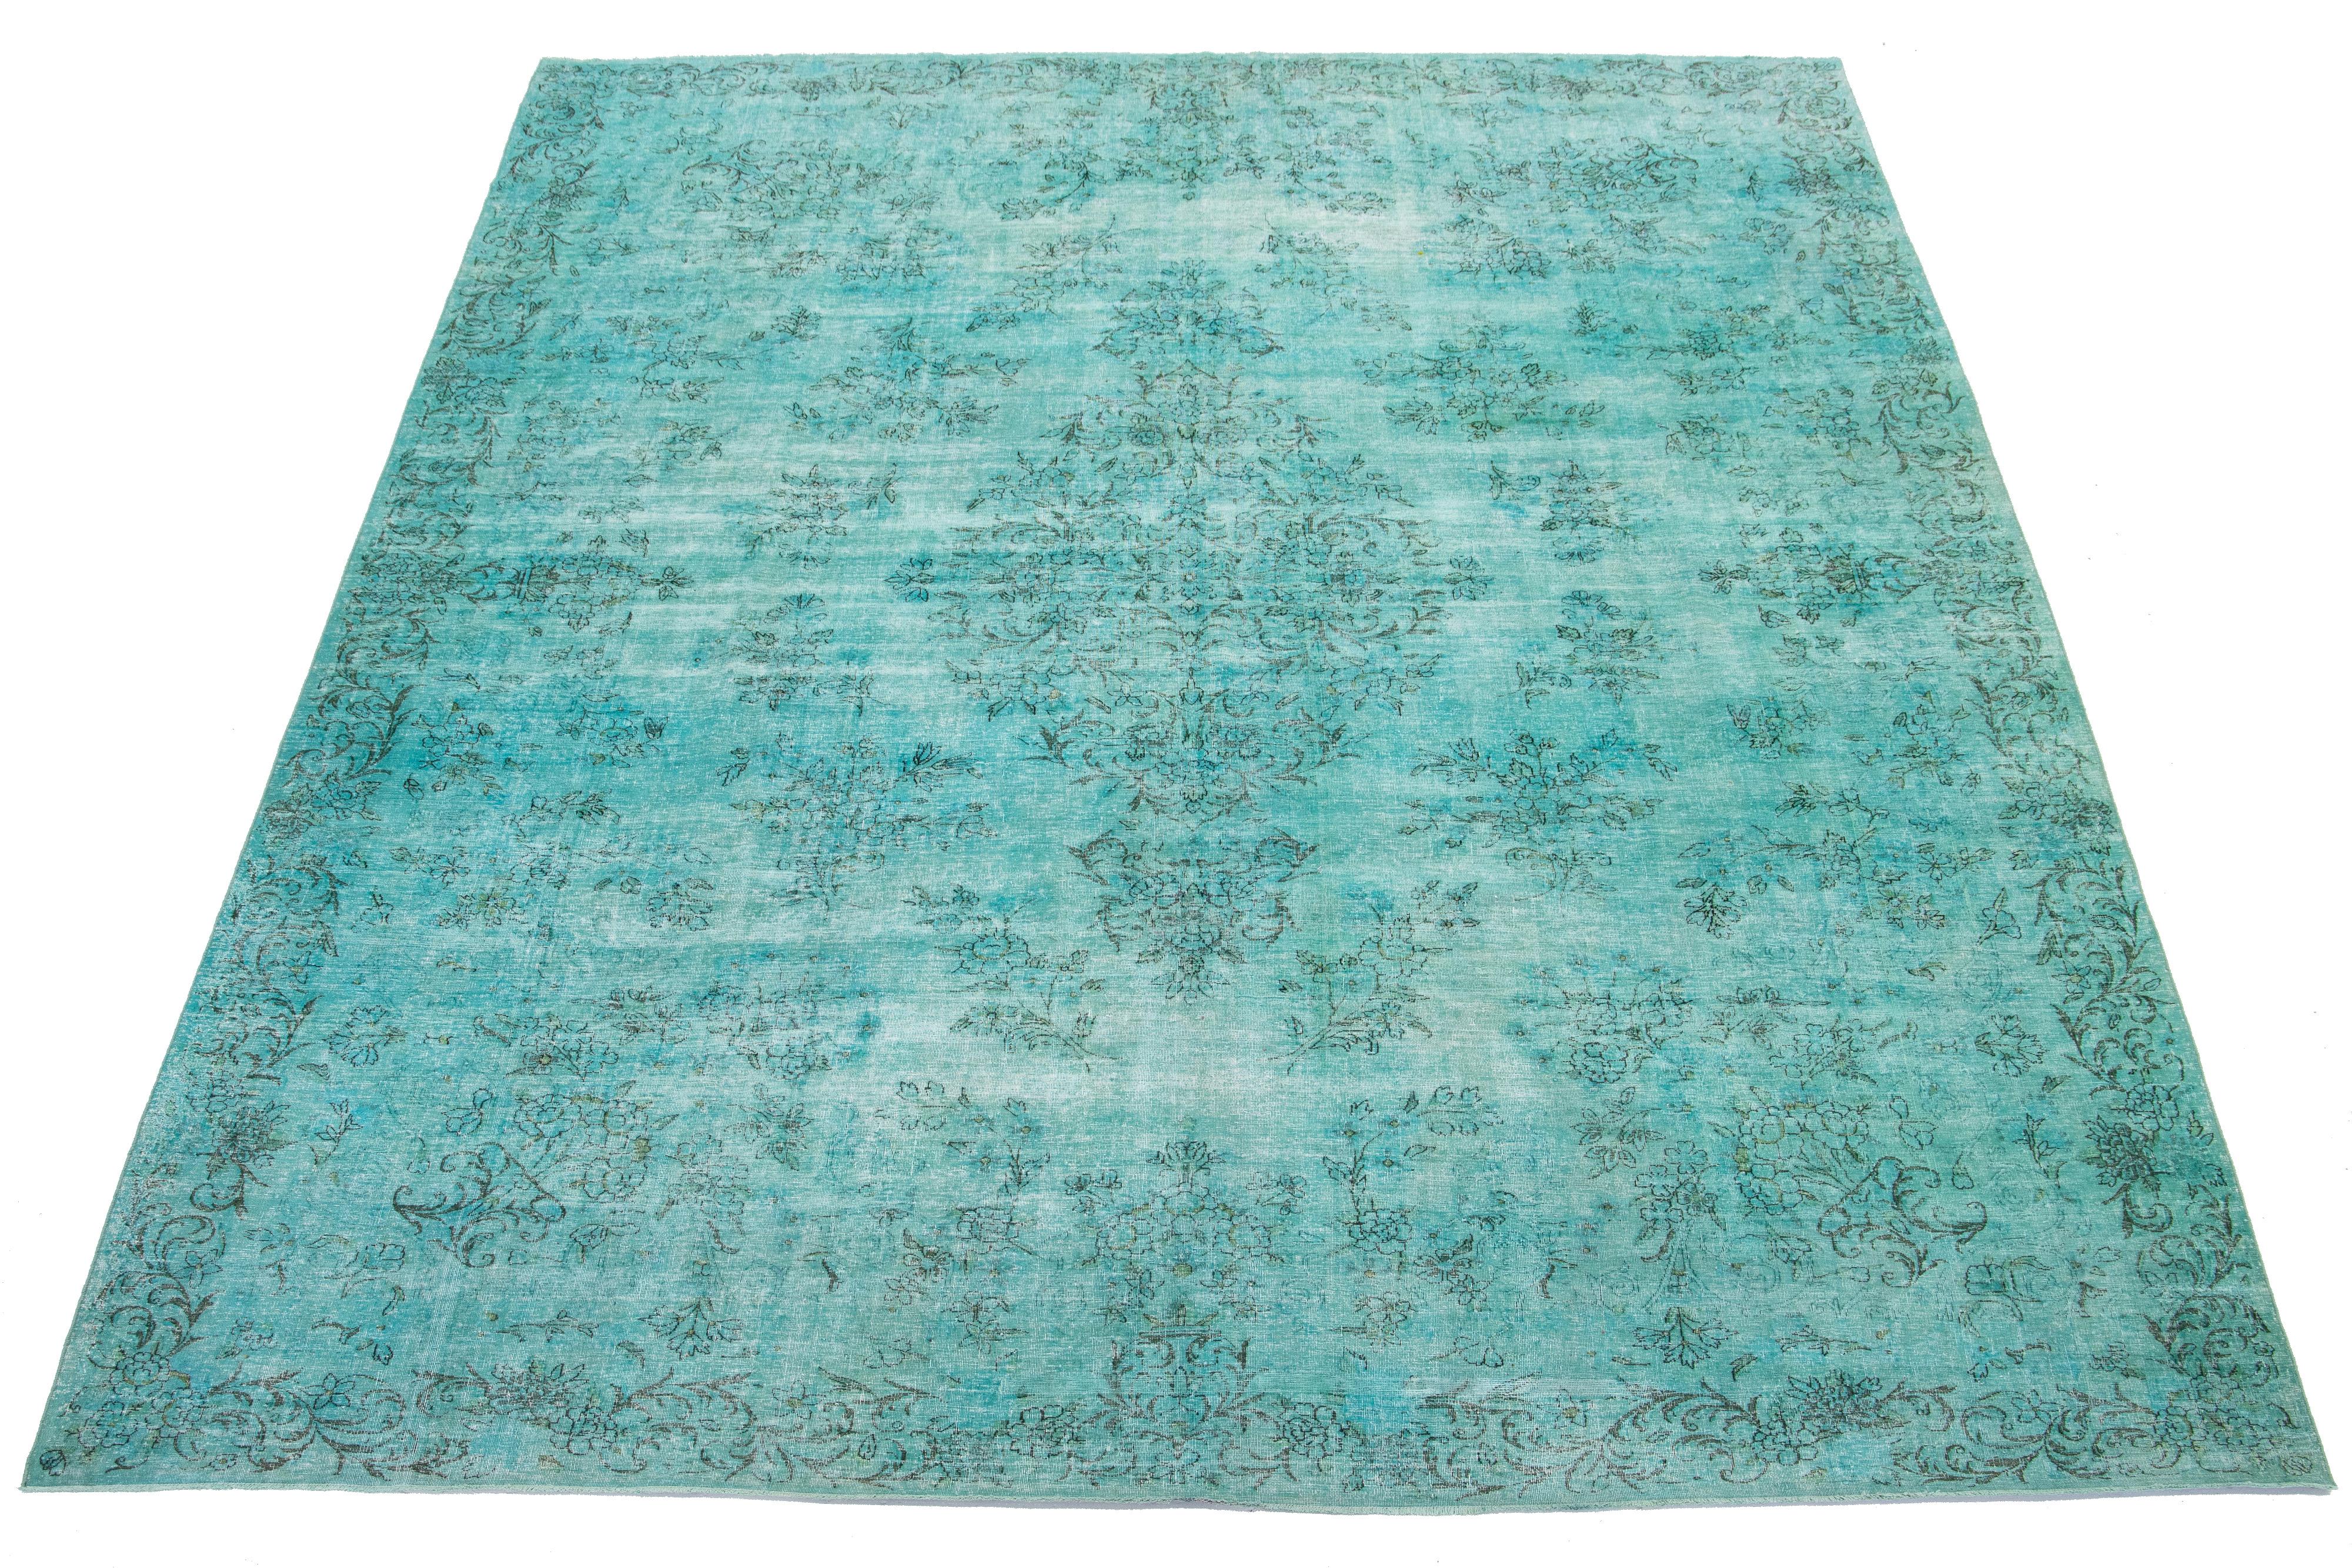 This is a Turquoise antique hand-knotted Persian wool rug with a medallion floral design and gray accents.

This rug measures 9'10'' x 13'7